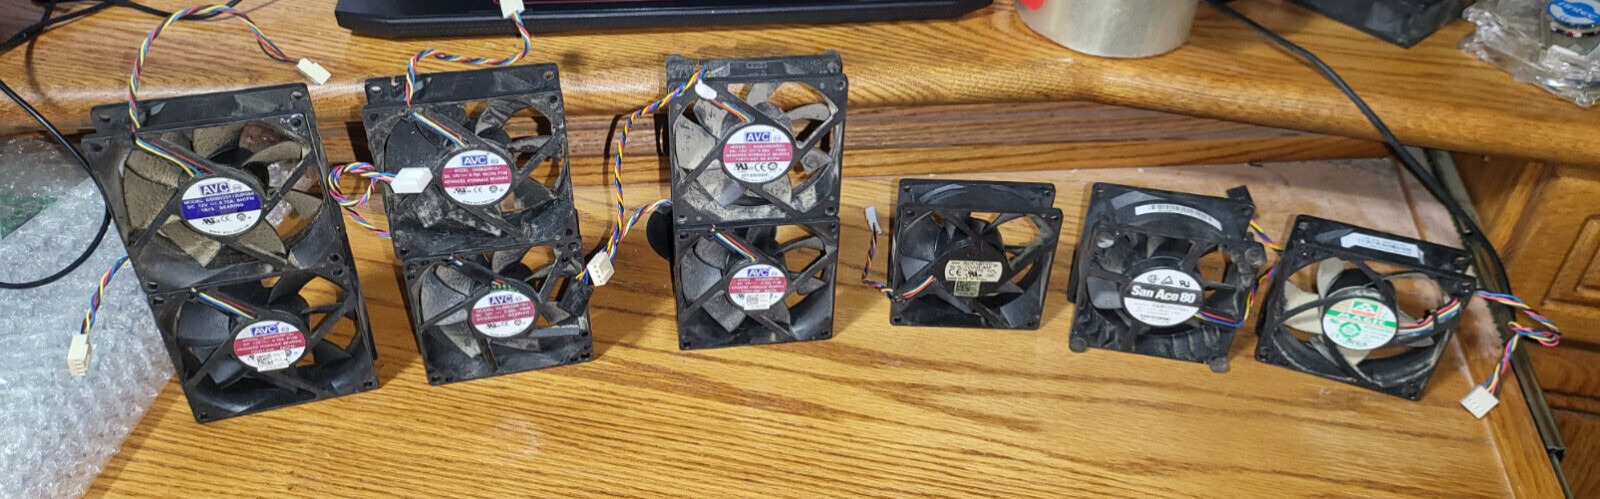 Lot of 40 (forty) Computer Case Fans